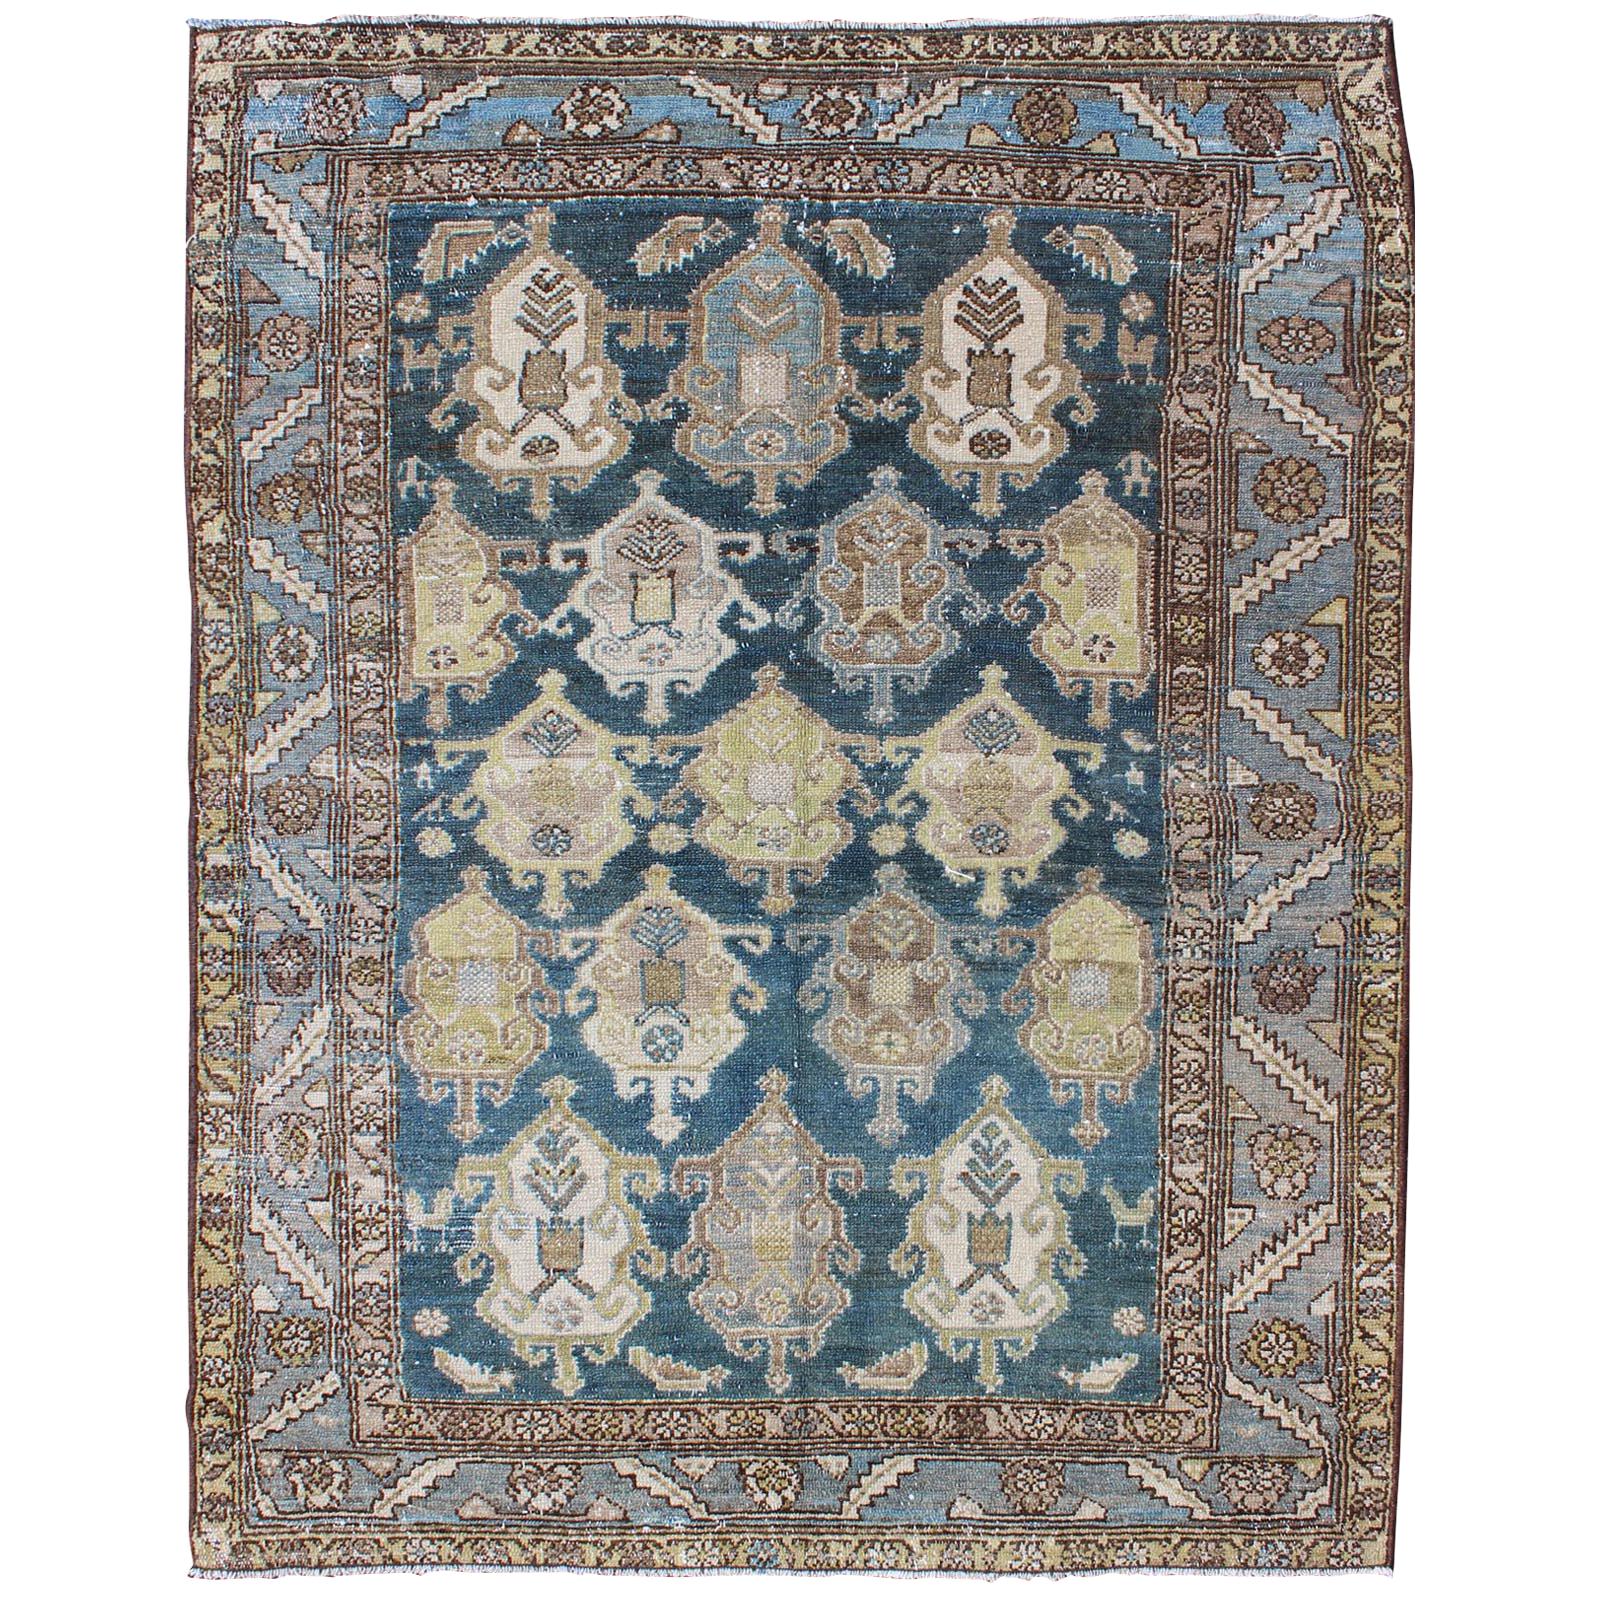 Shades of Blue and Ivory Antique Persian Fine Malayer Rug, Large Scale Design